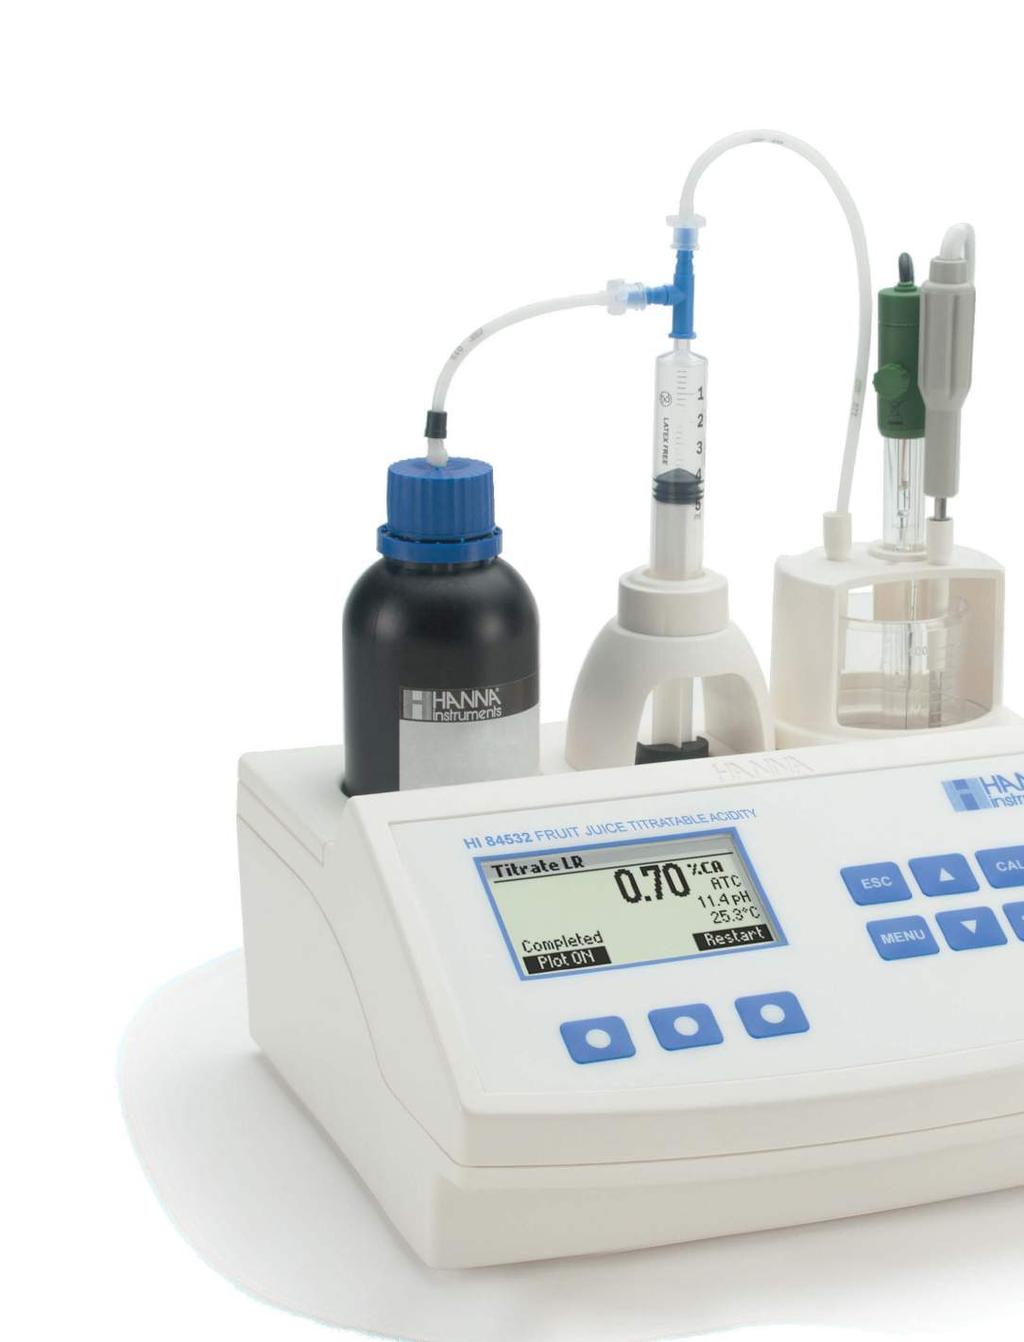 HI 84532 Mini Titrator for Fruit Juice Applications Piston Driven Pump with Dynamic Dosing This piston driven dosing pump incorporates dynamic dosing to provide highly accurate,